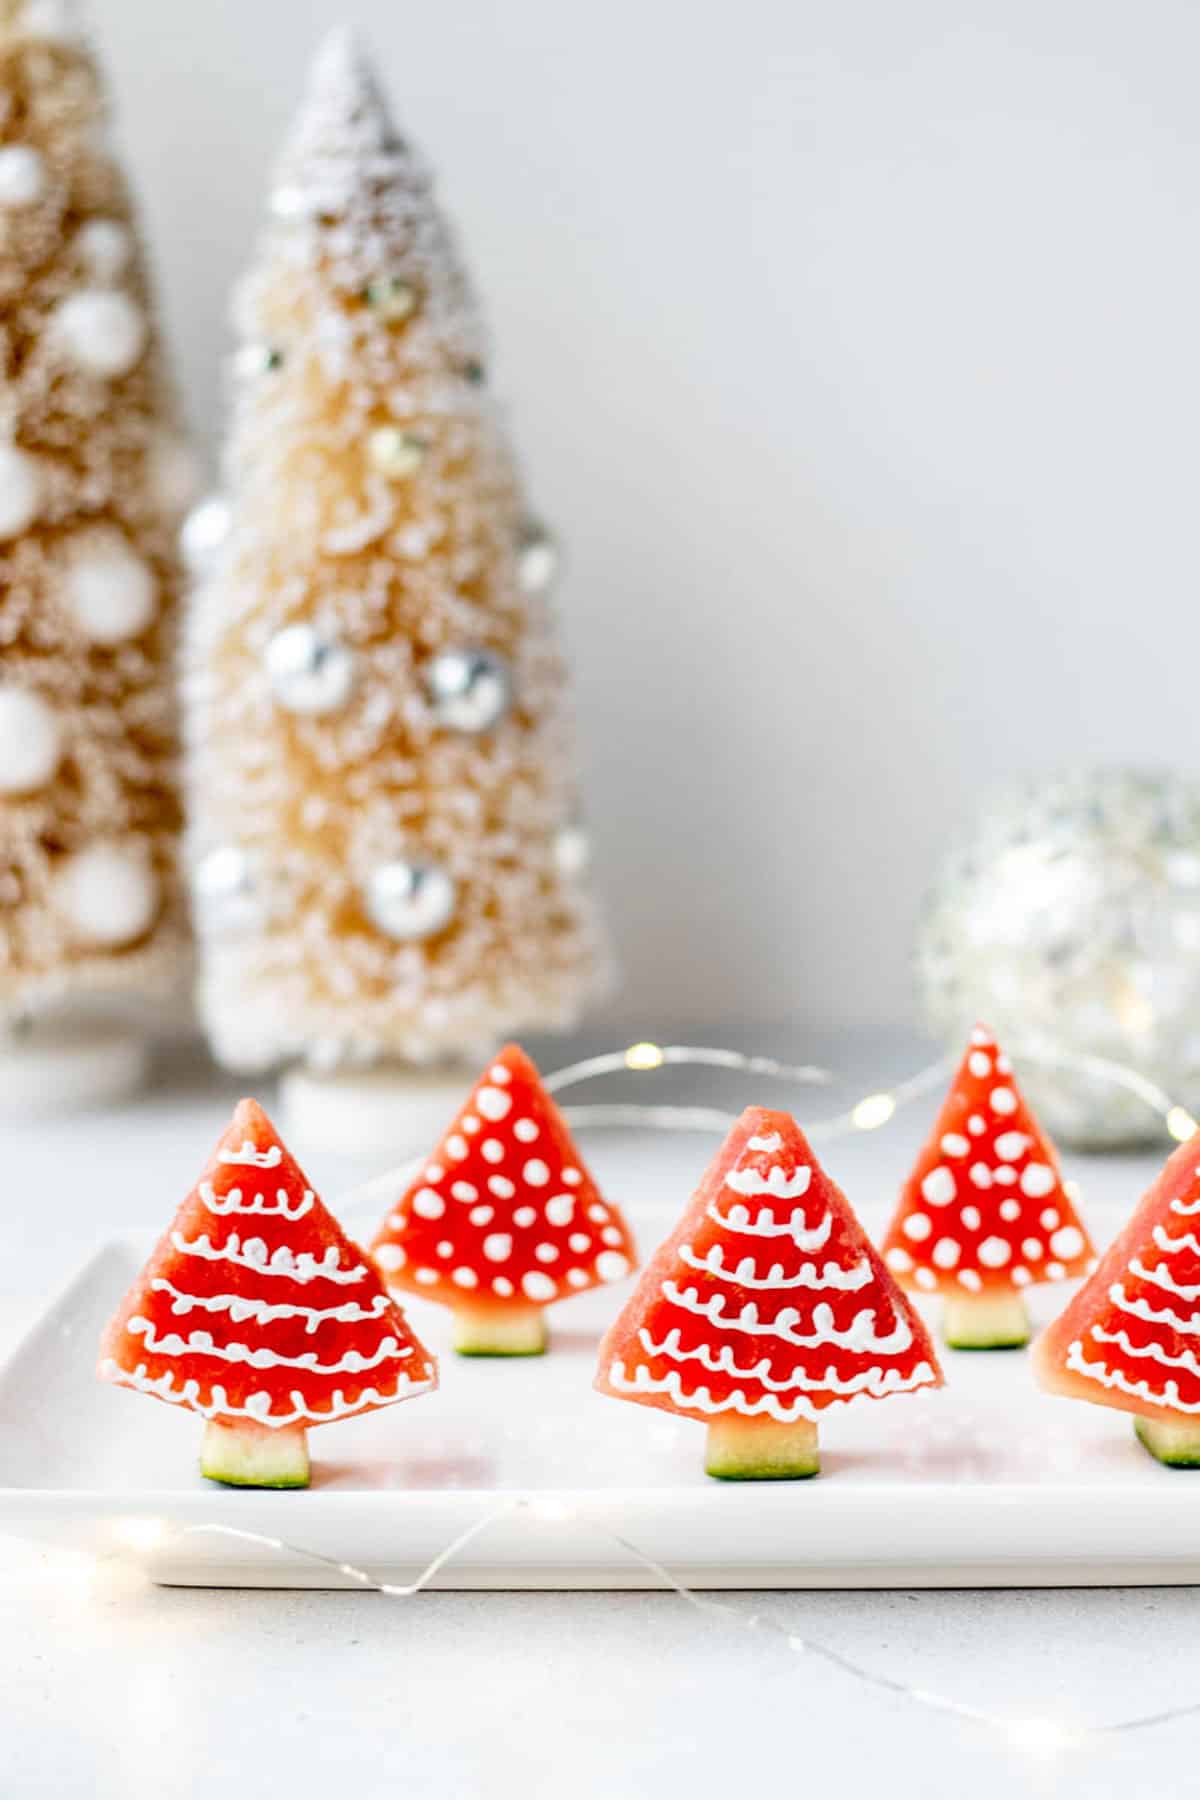 Christmas watermelon trees upright on a white plate.